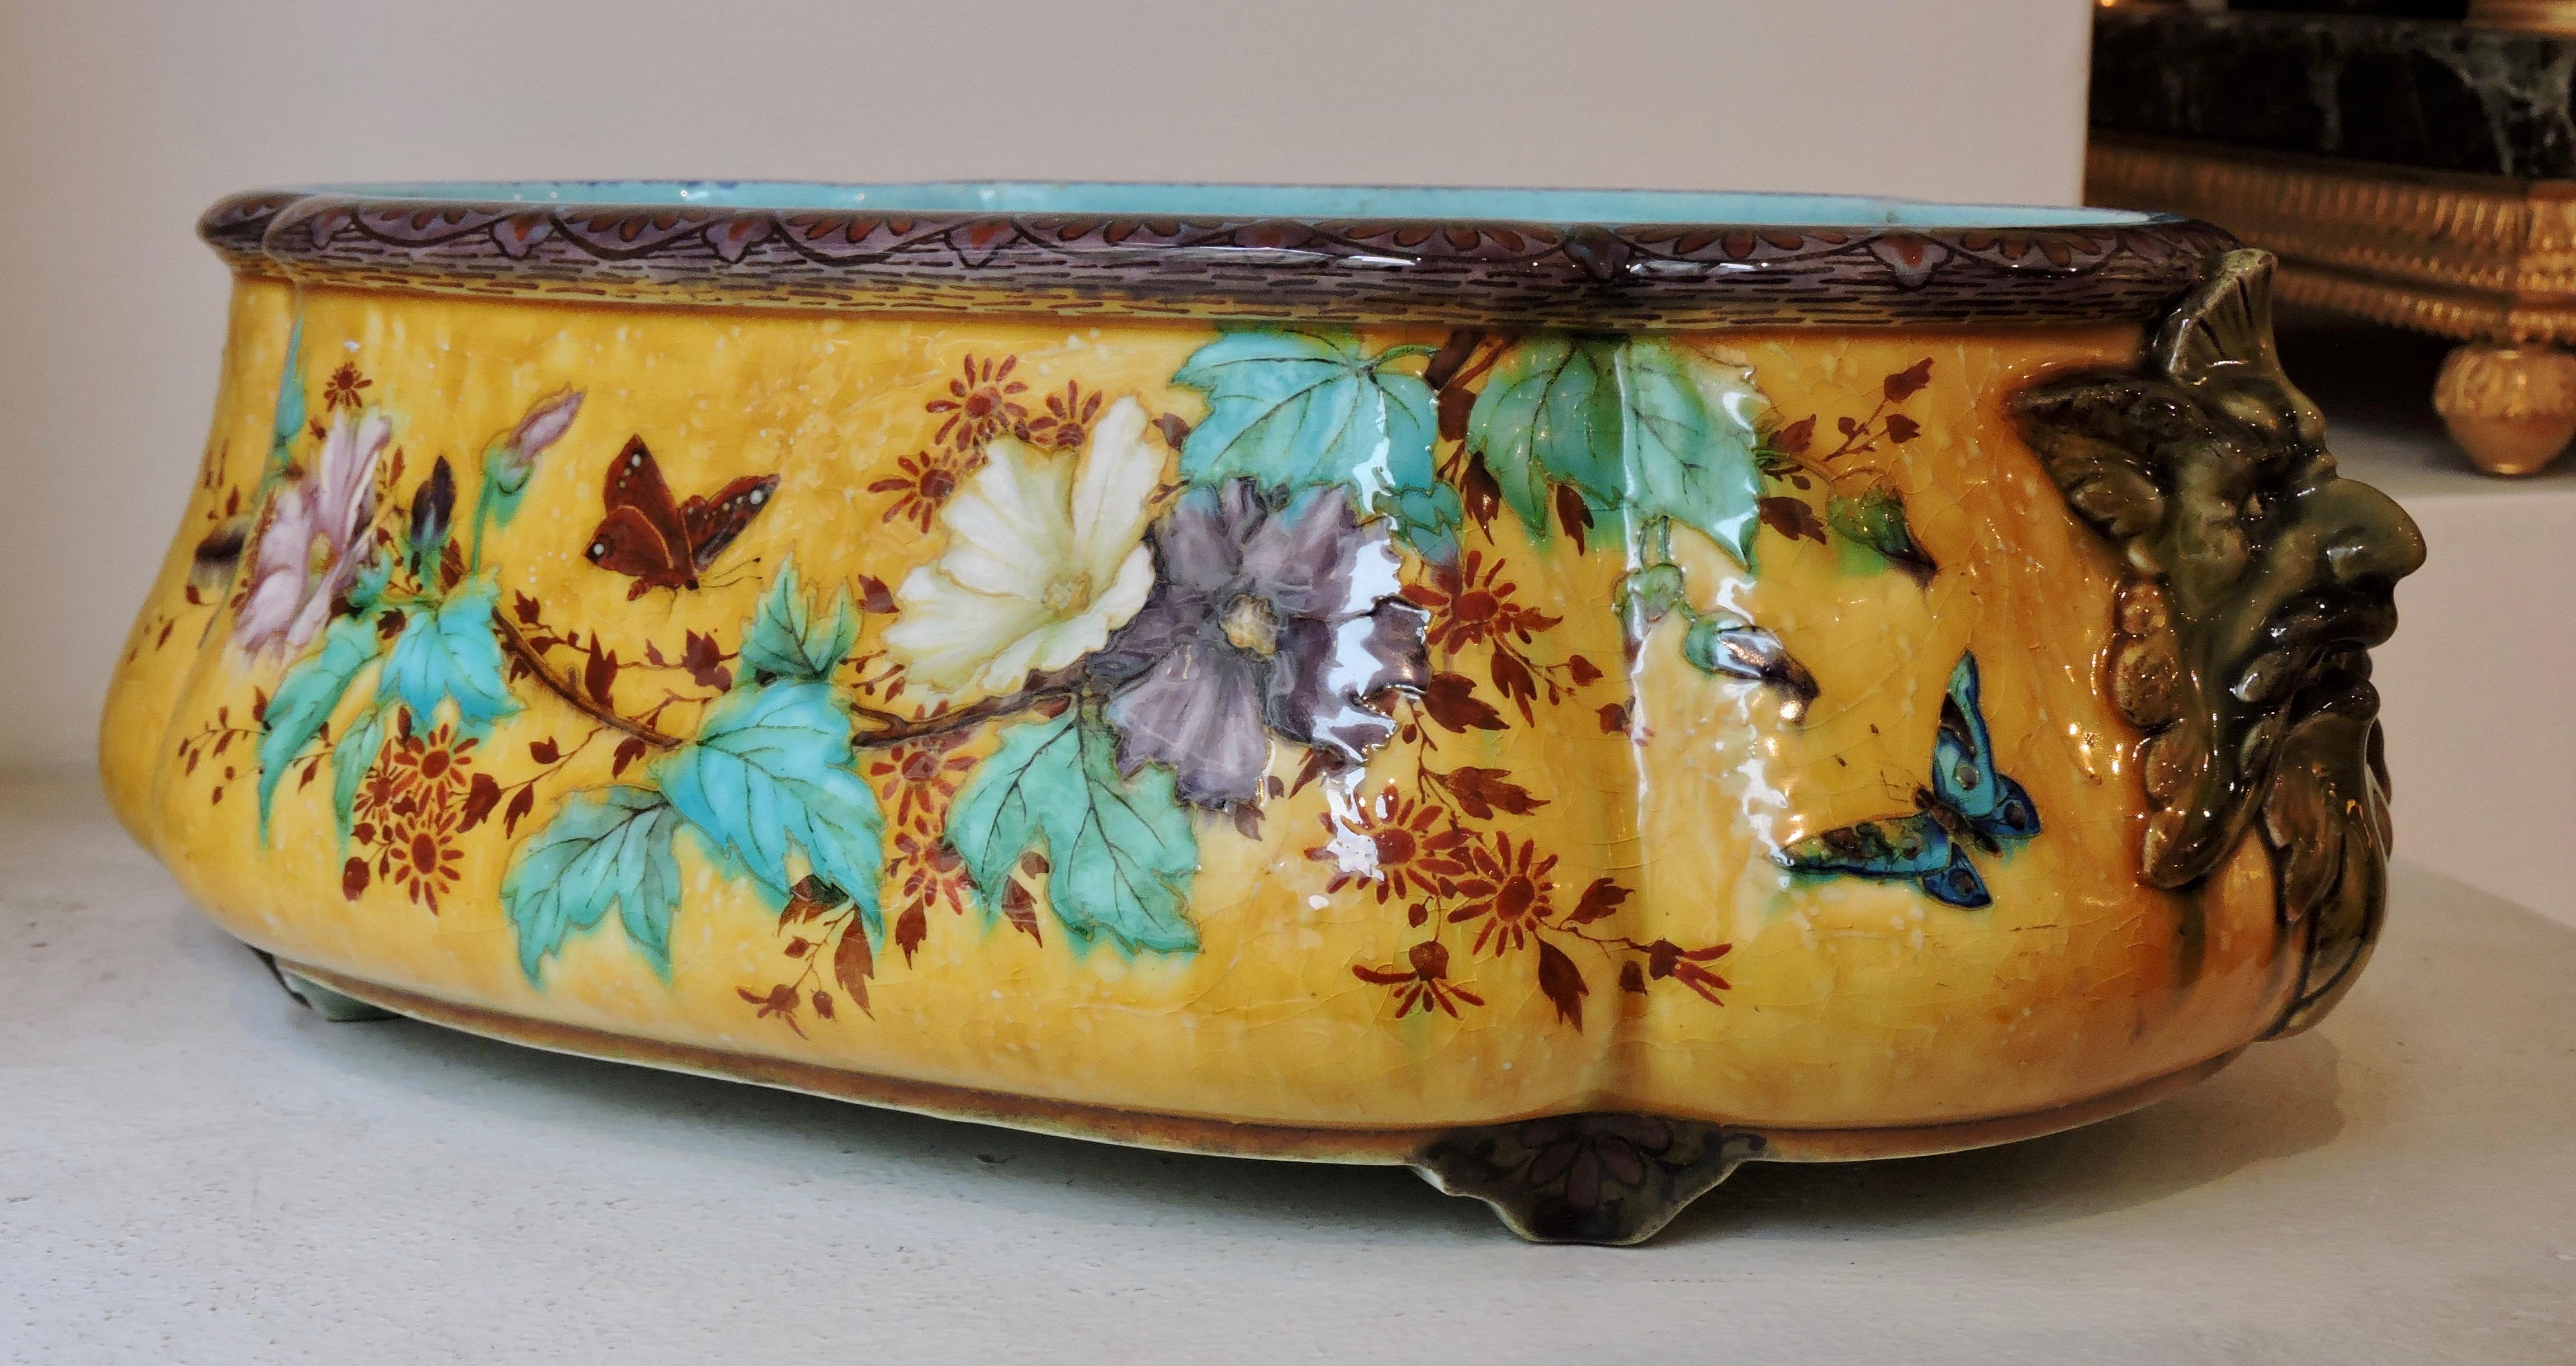 French Théodore Deck Enameled Faience Jardiniere Centerpiece, circa 1870